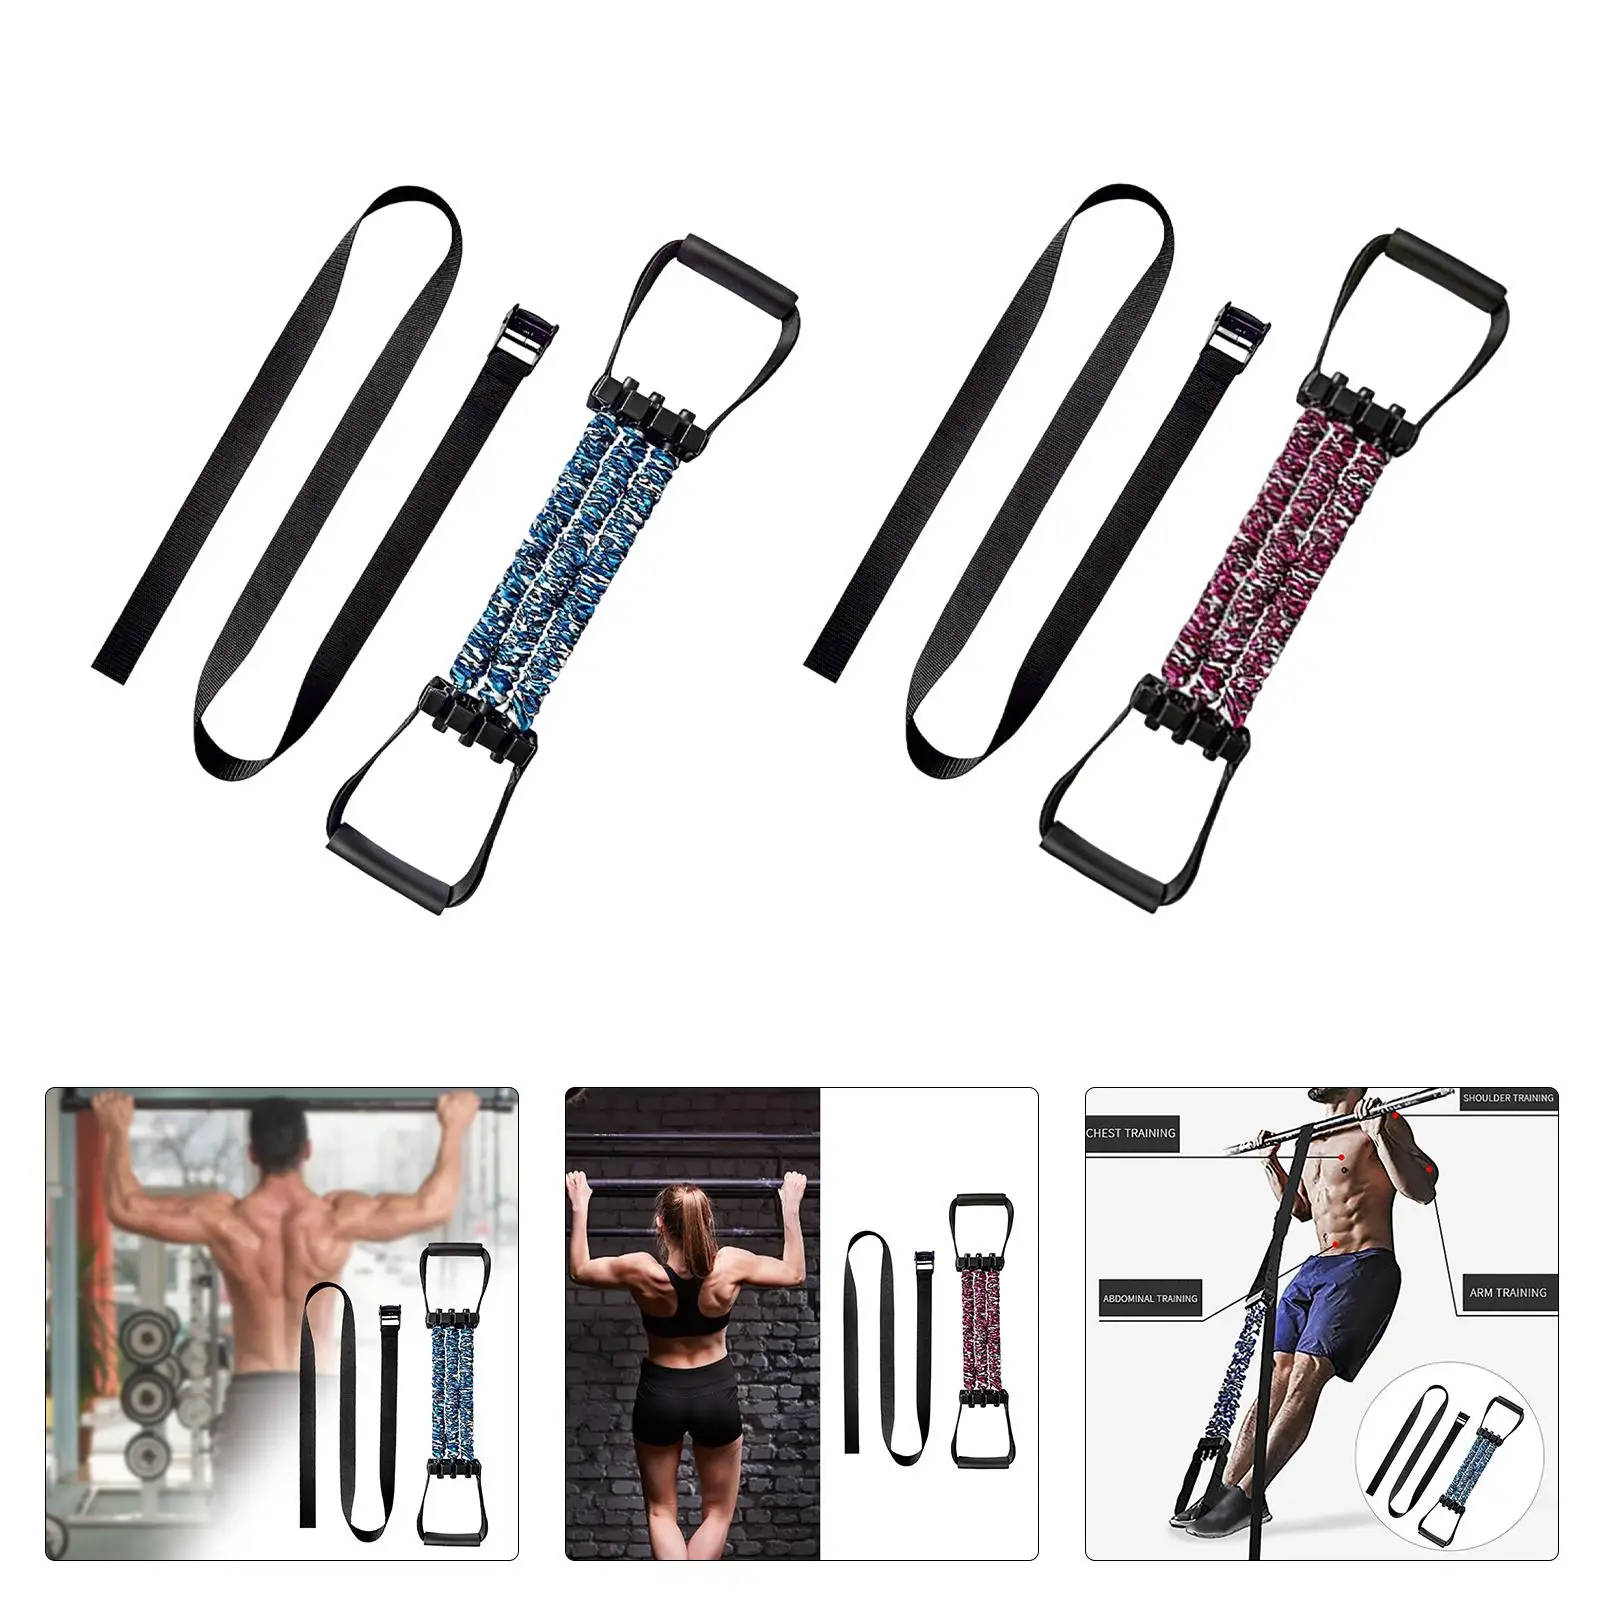 Chin Up Assist Bands Premium Resistance Bands for Powerlifting Fitness